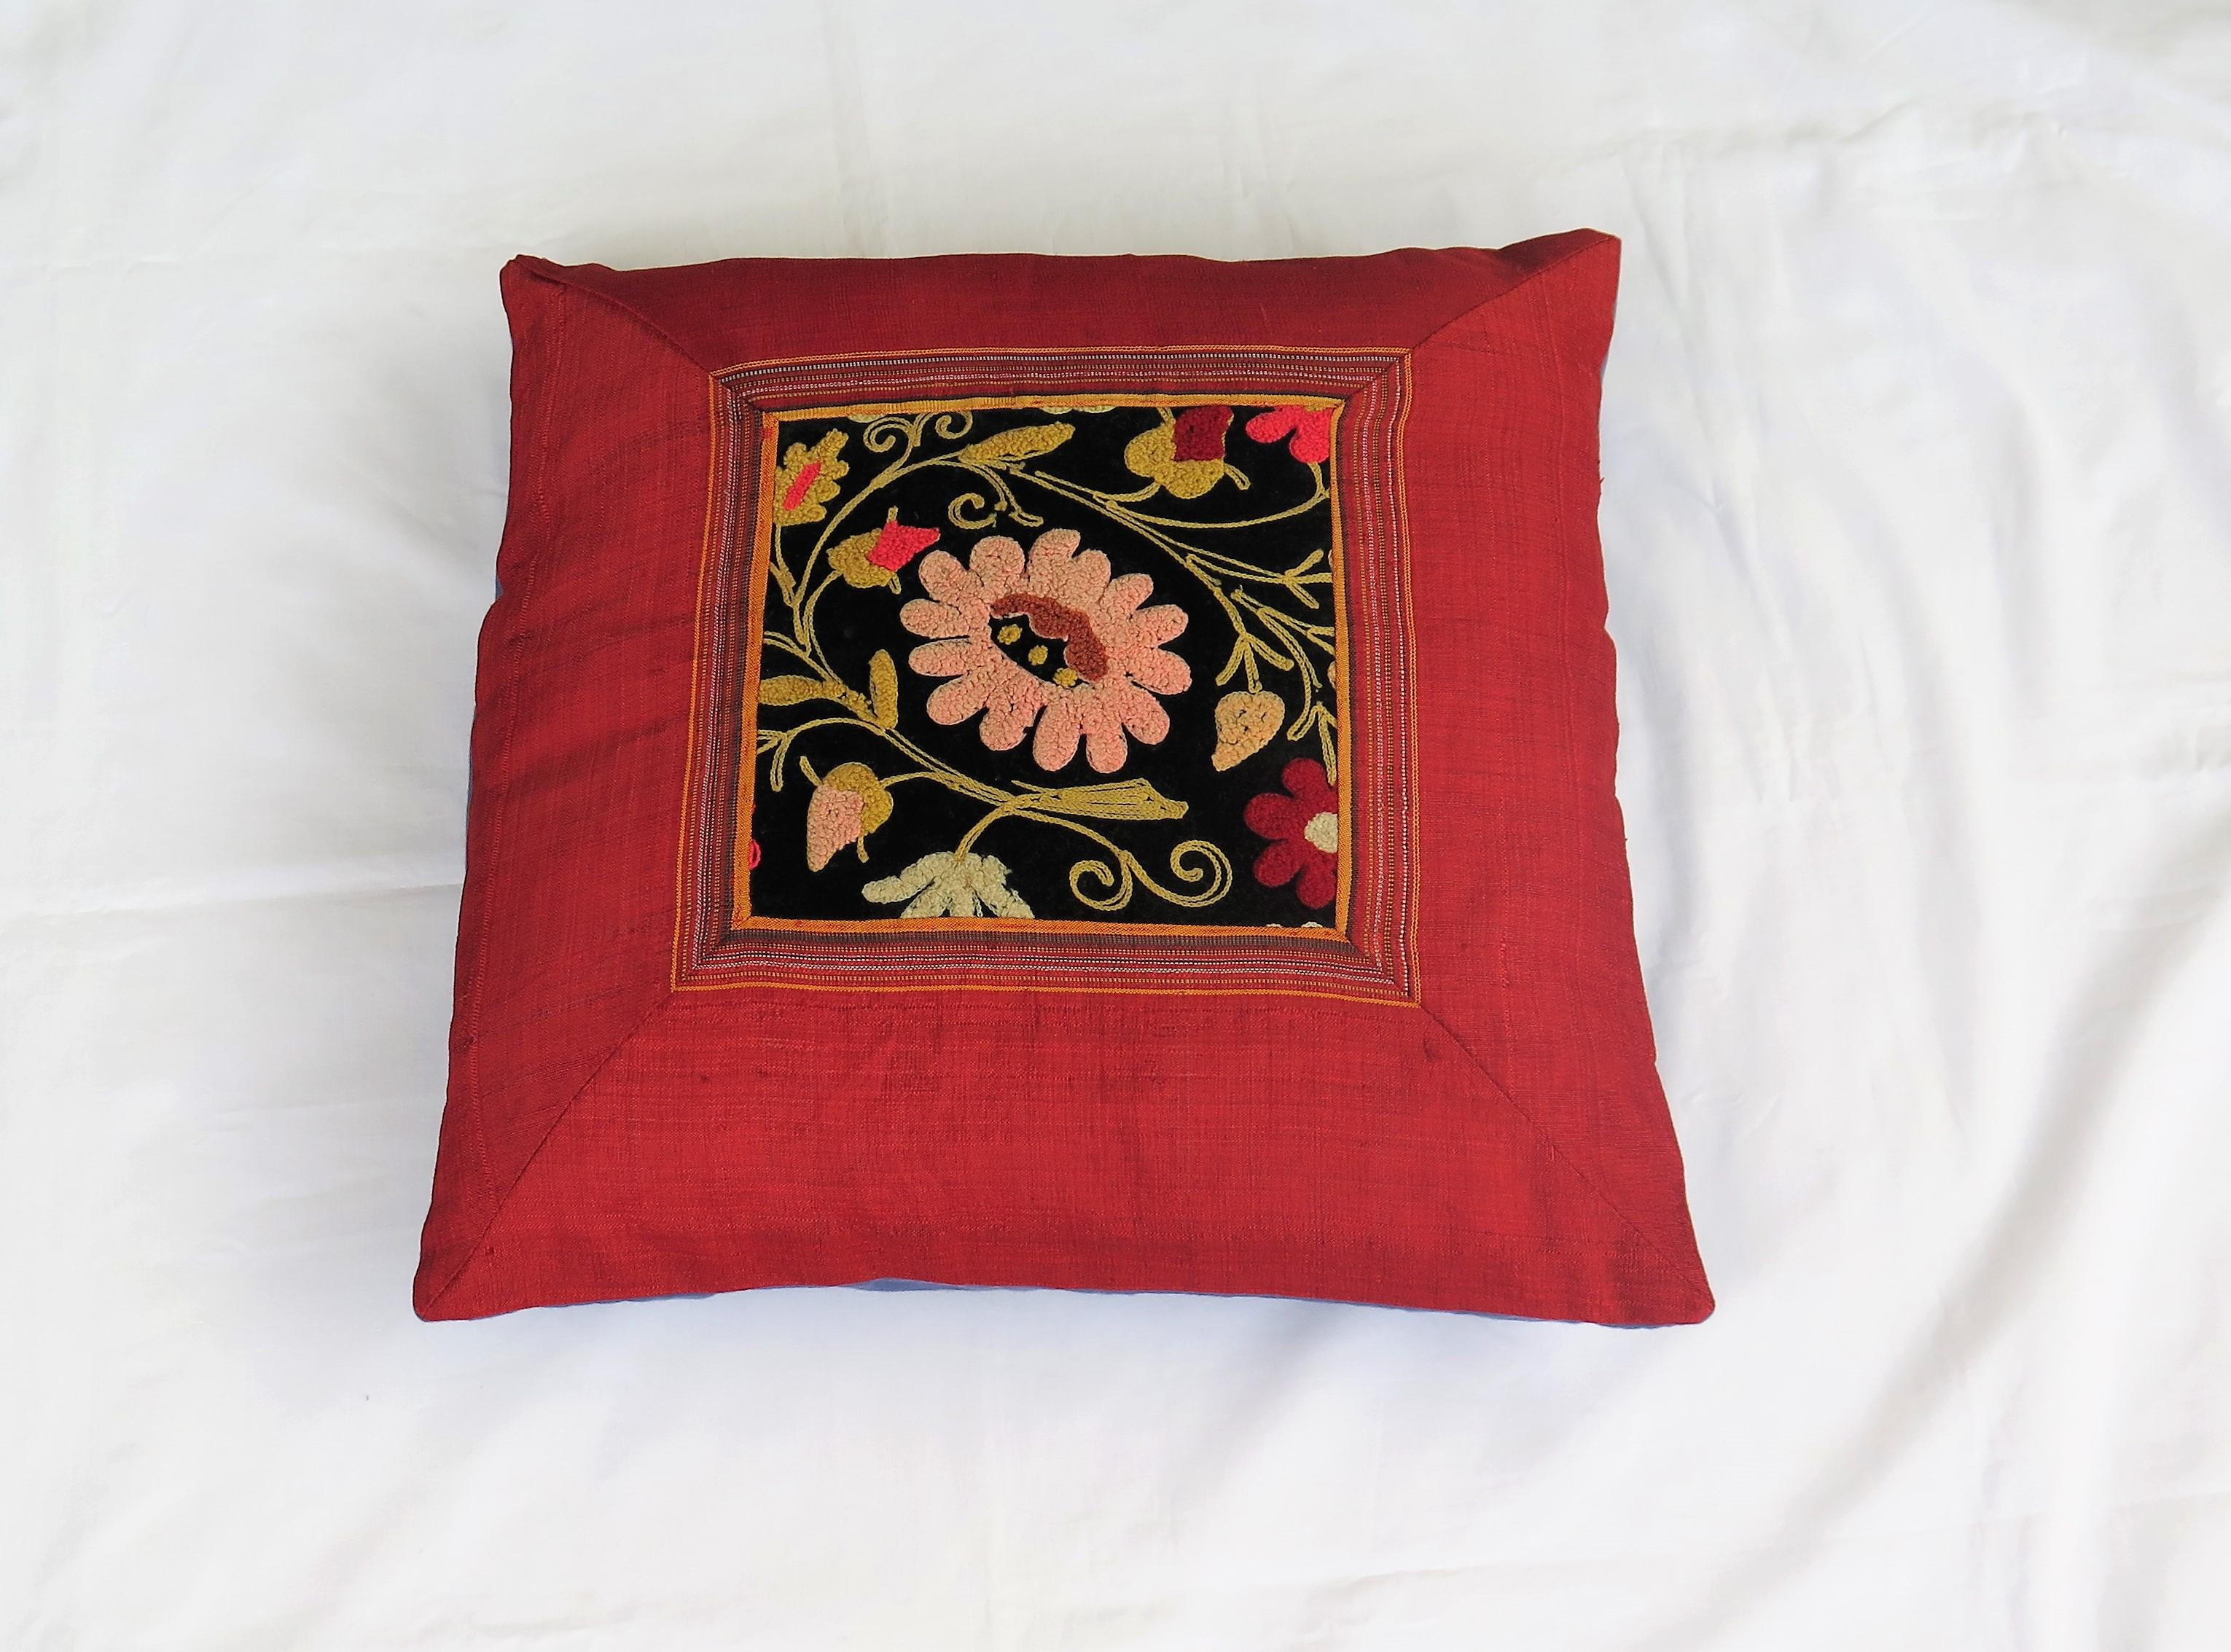 Hand-Crafted Art Nouveau Cushion or Pillow hand Embroidered, Circa 1900 For Sale